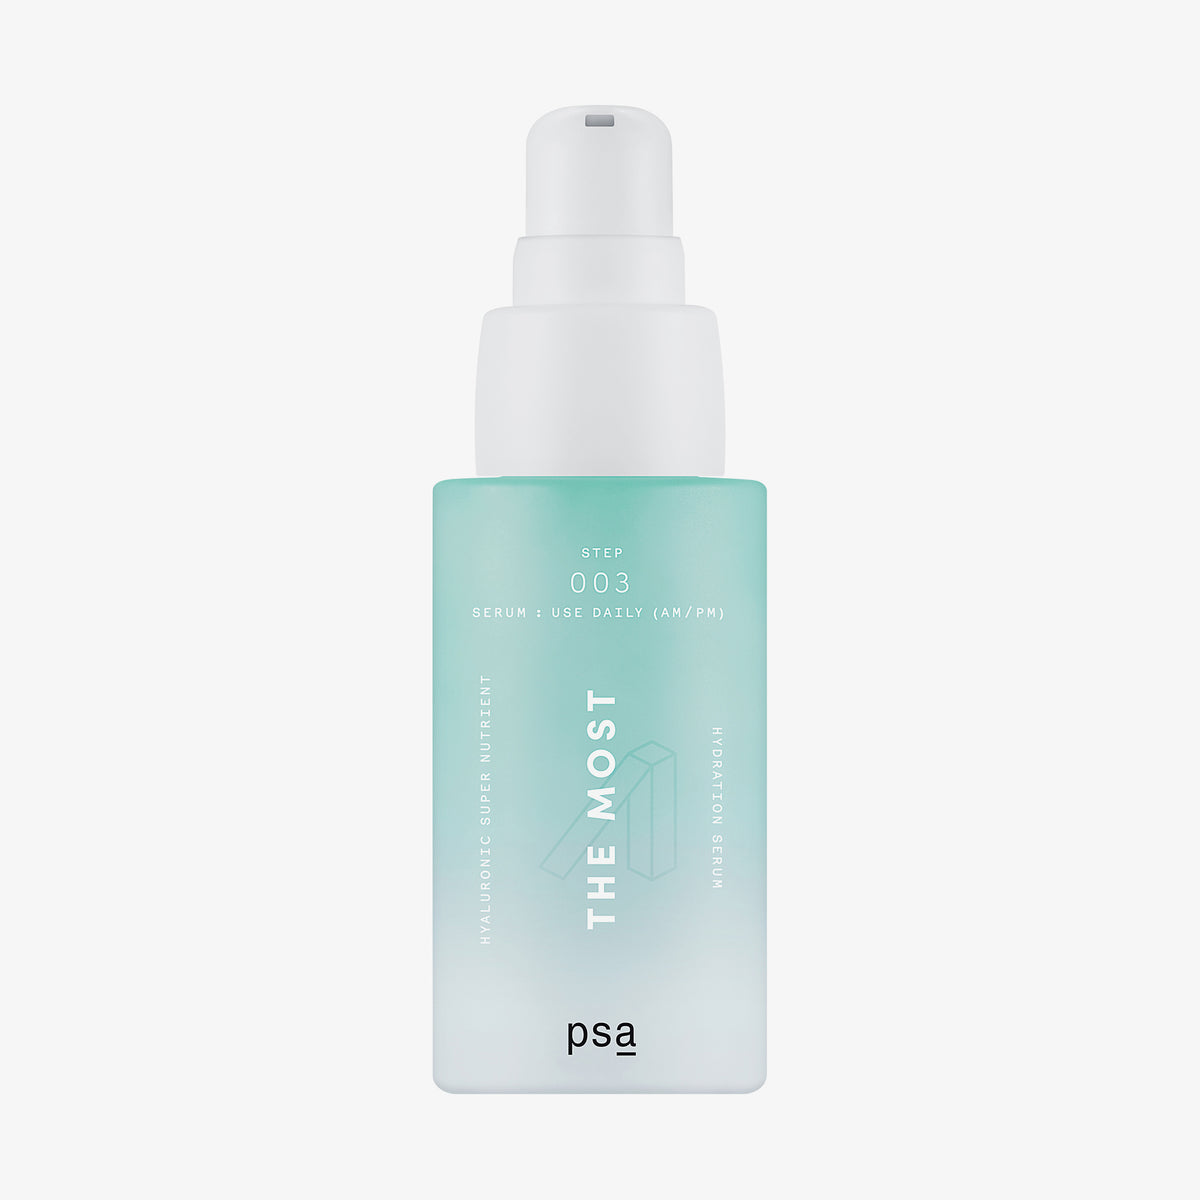 PSA | THE MOST Hyaluronic Super Nutrient Hydration Serum